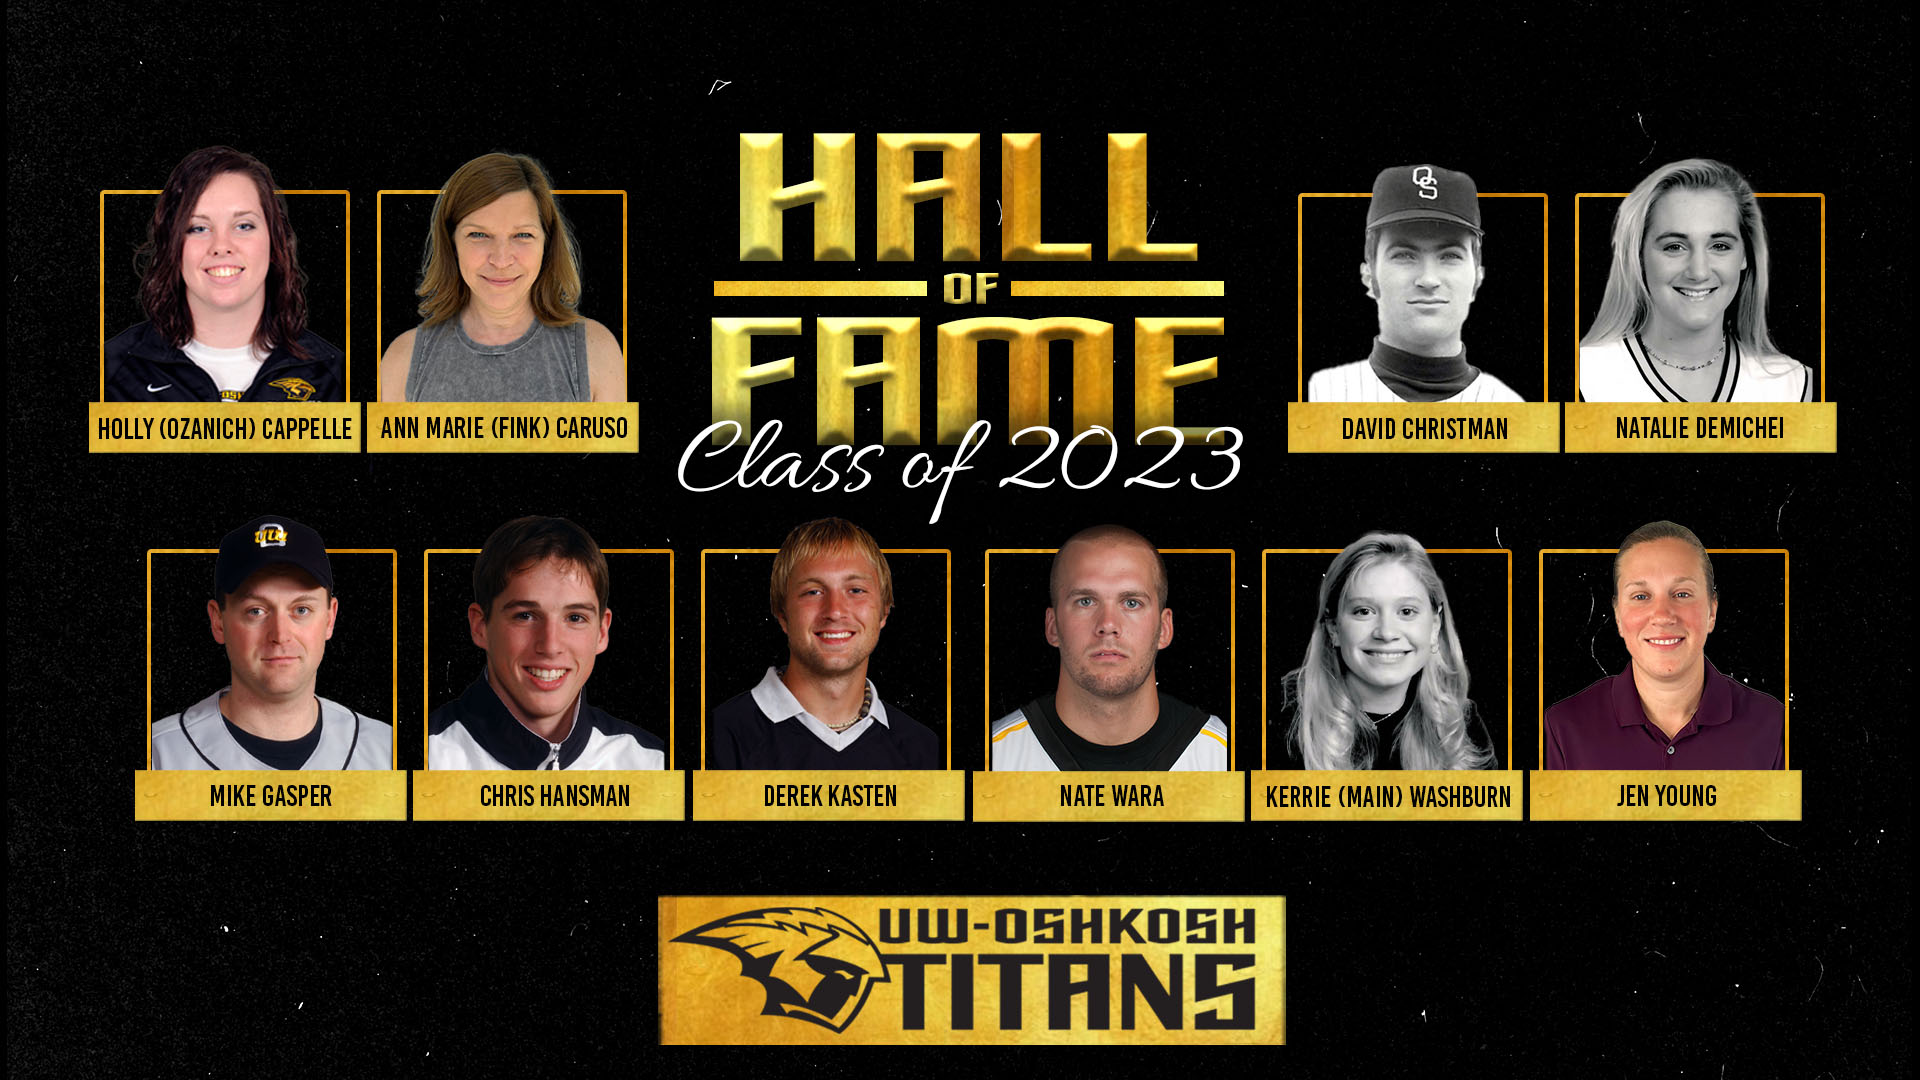 UW-Oshkosh To Induct 10 New Members Into Hall Of Fame